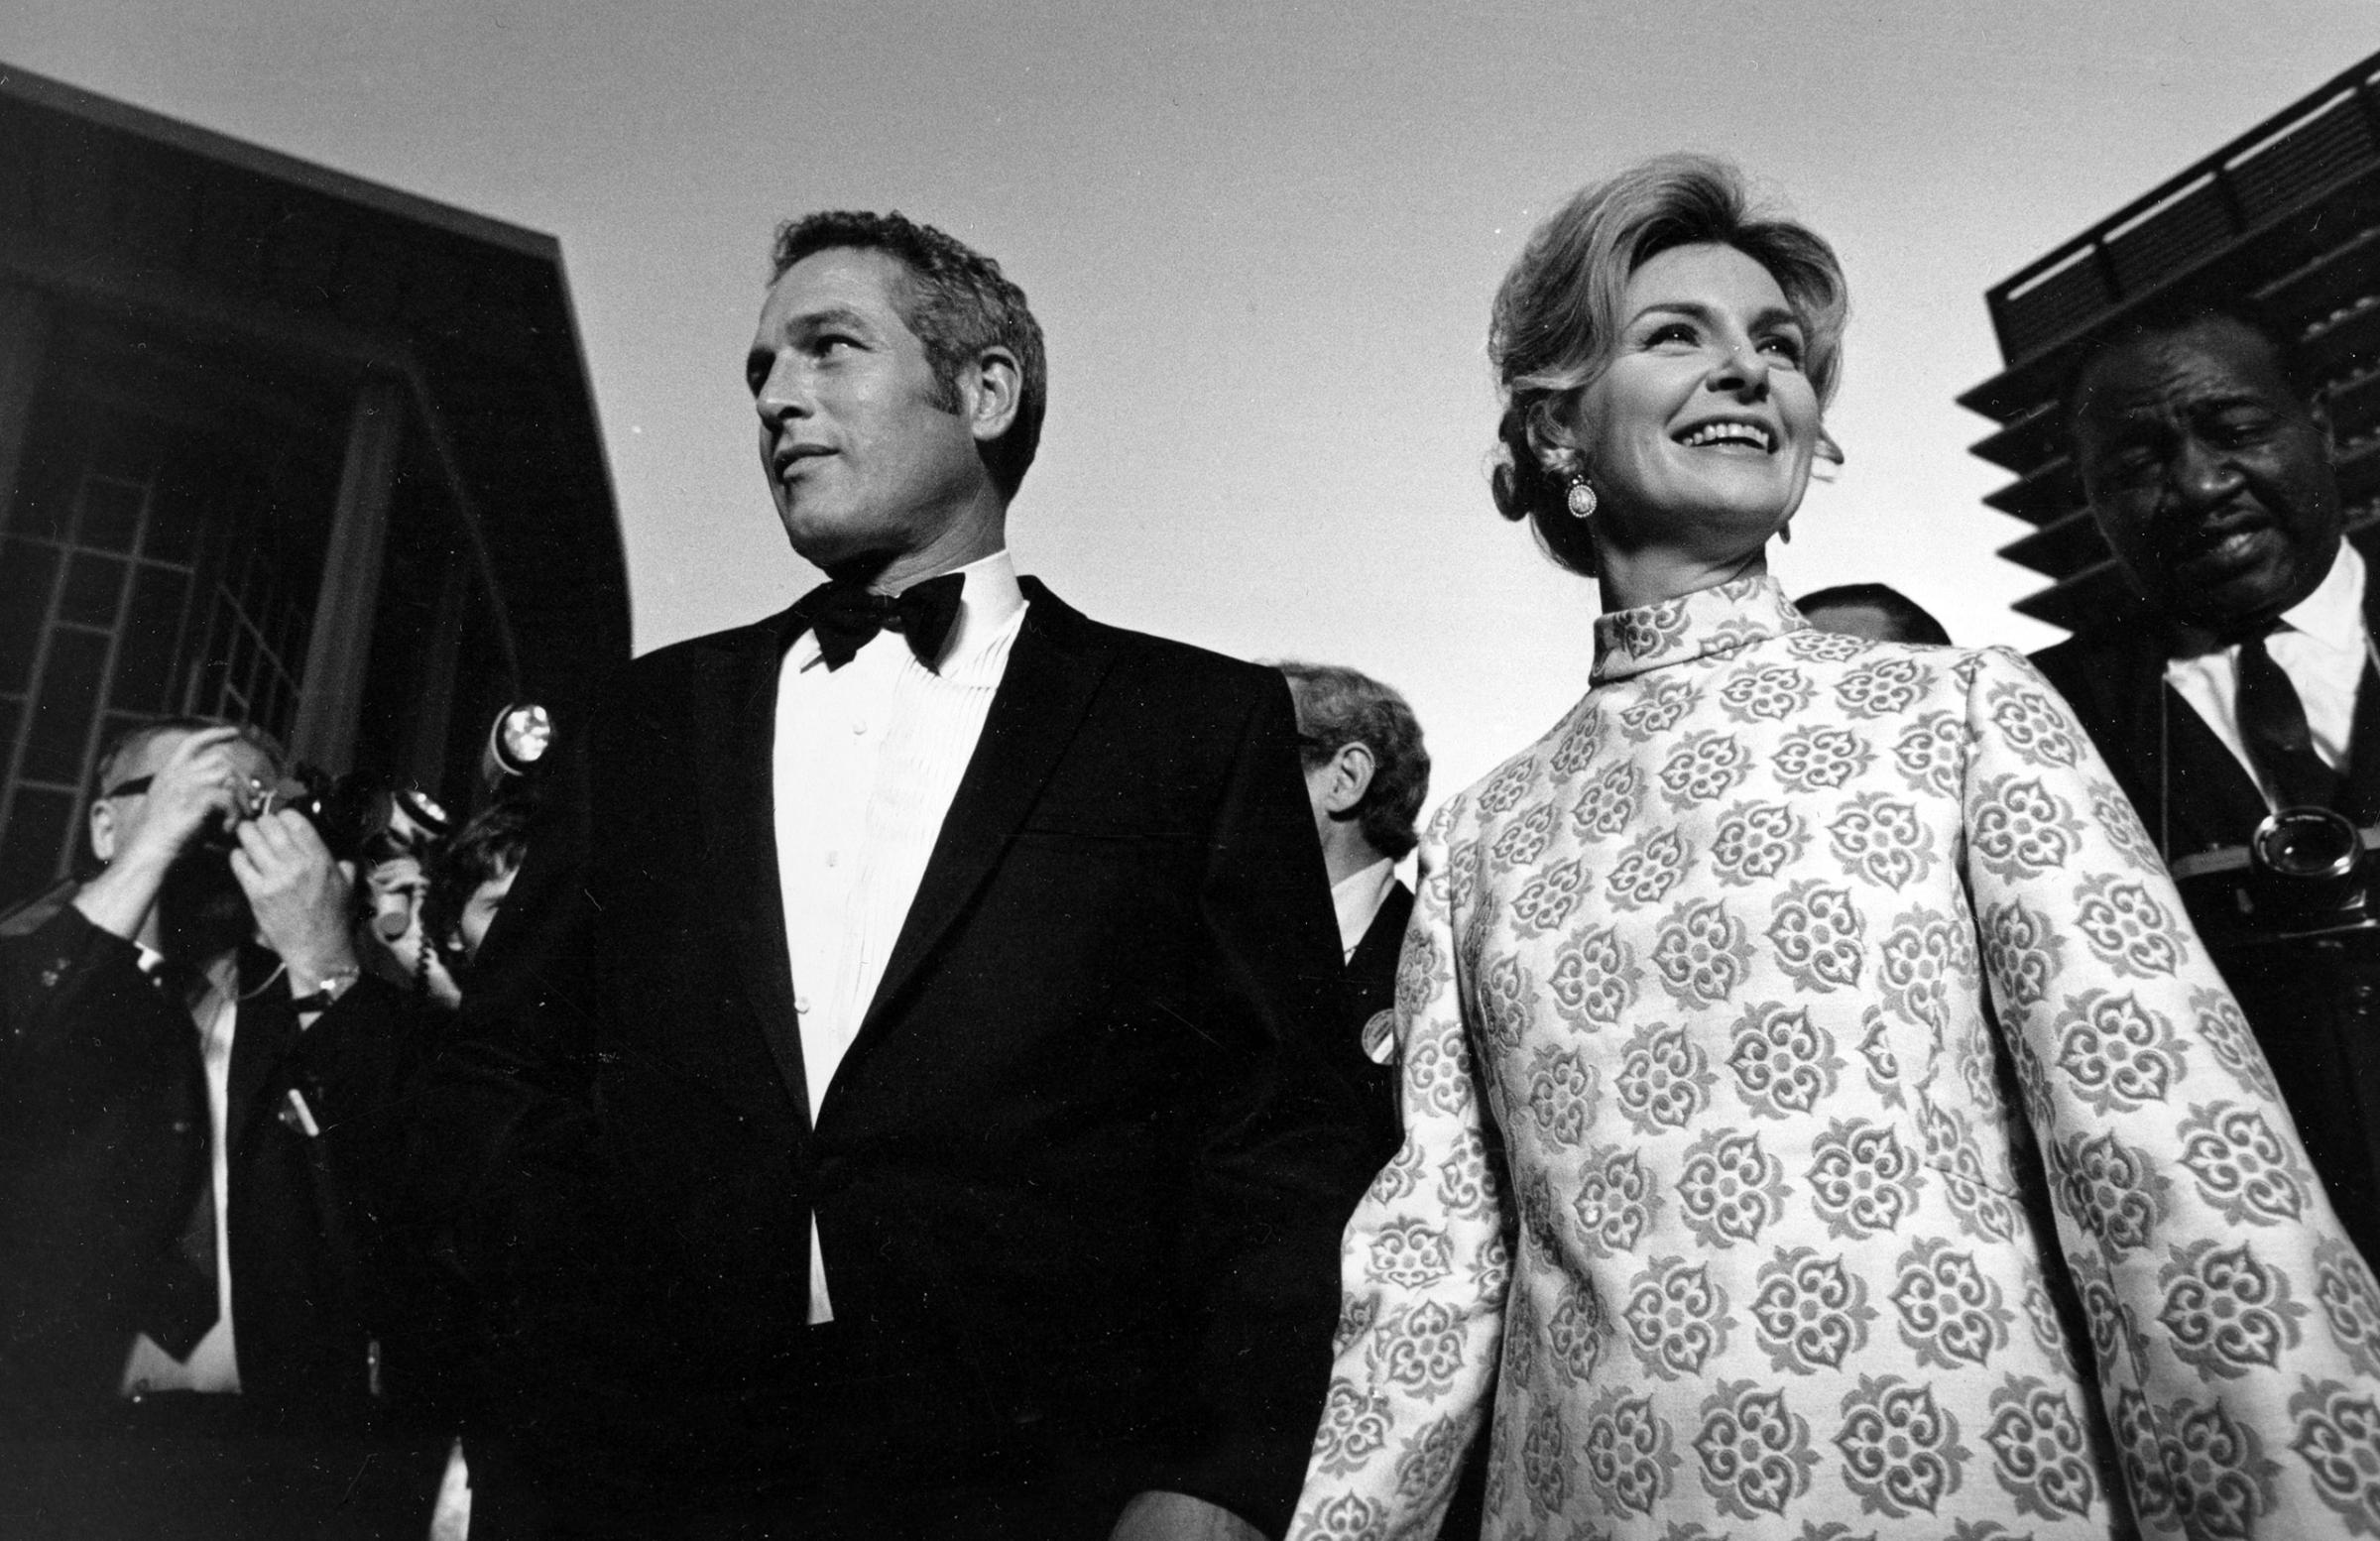 Joanne Woodward arrives with her husband, Paul Newman at the Academy Awards, 1969.